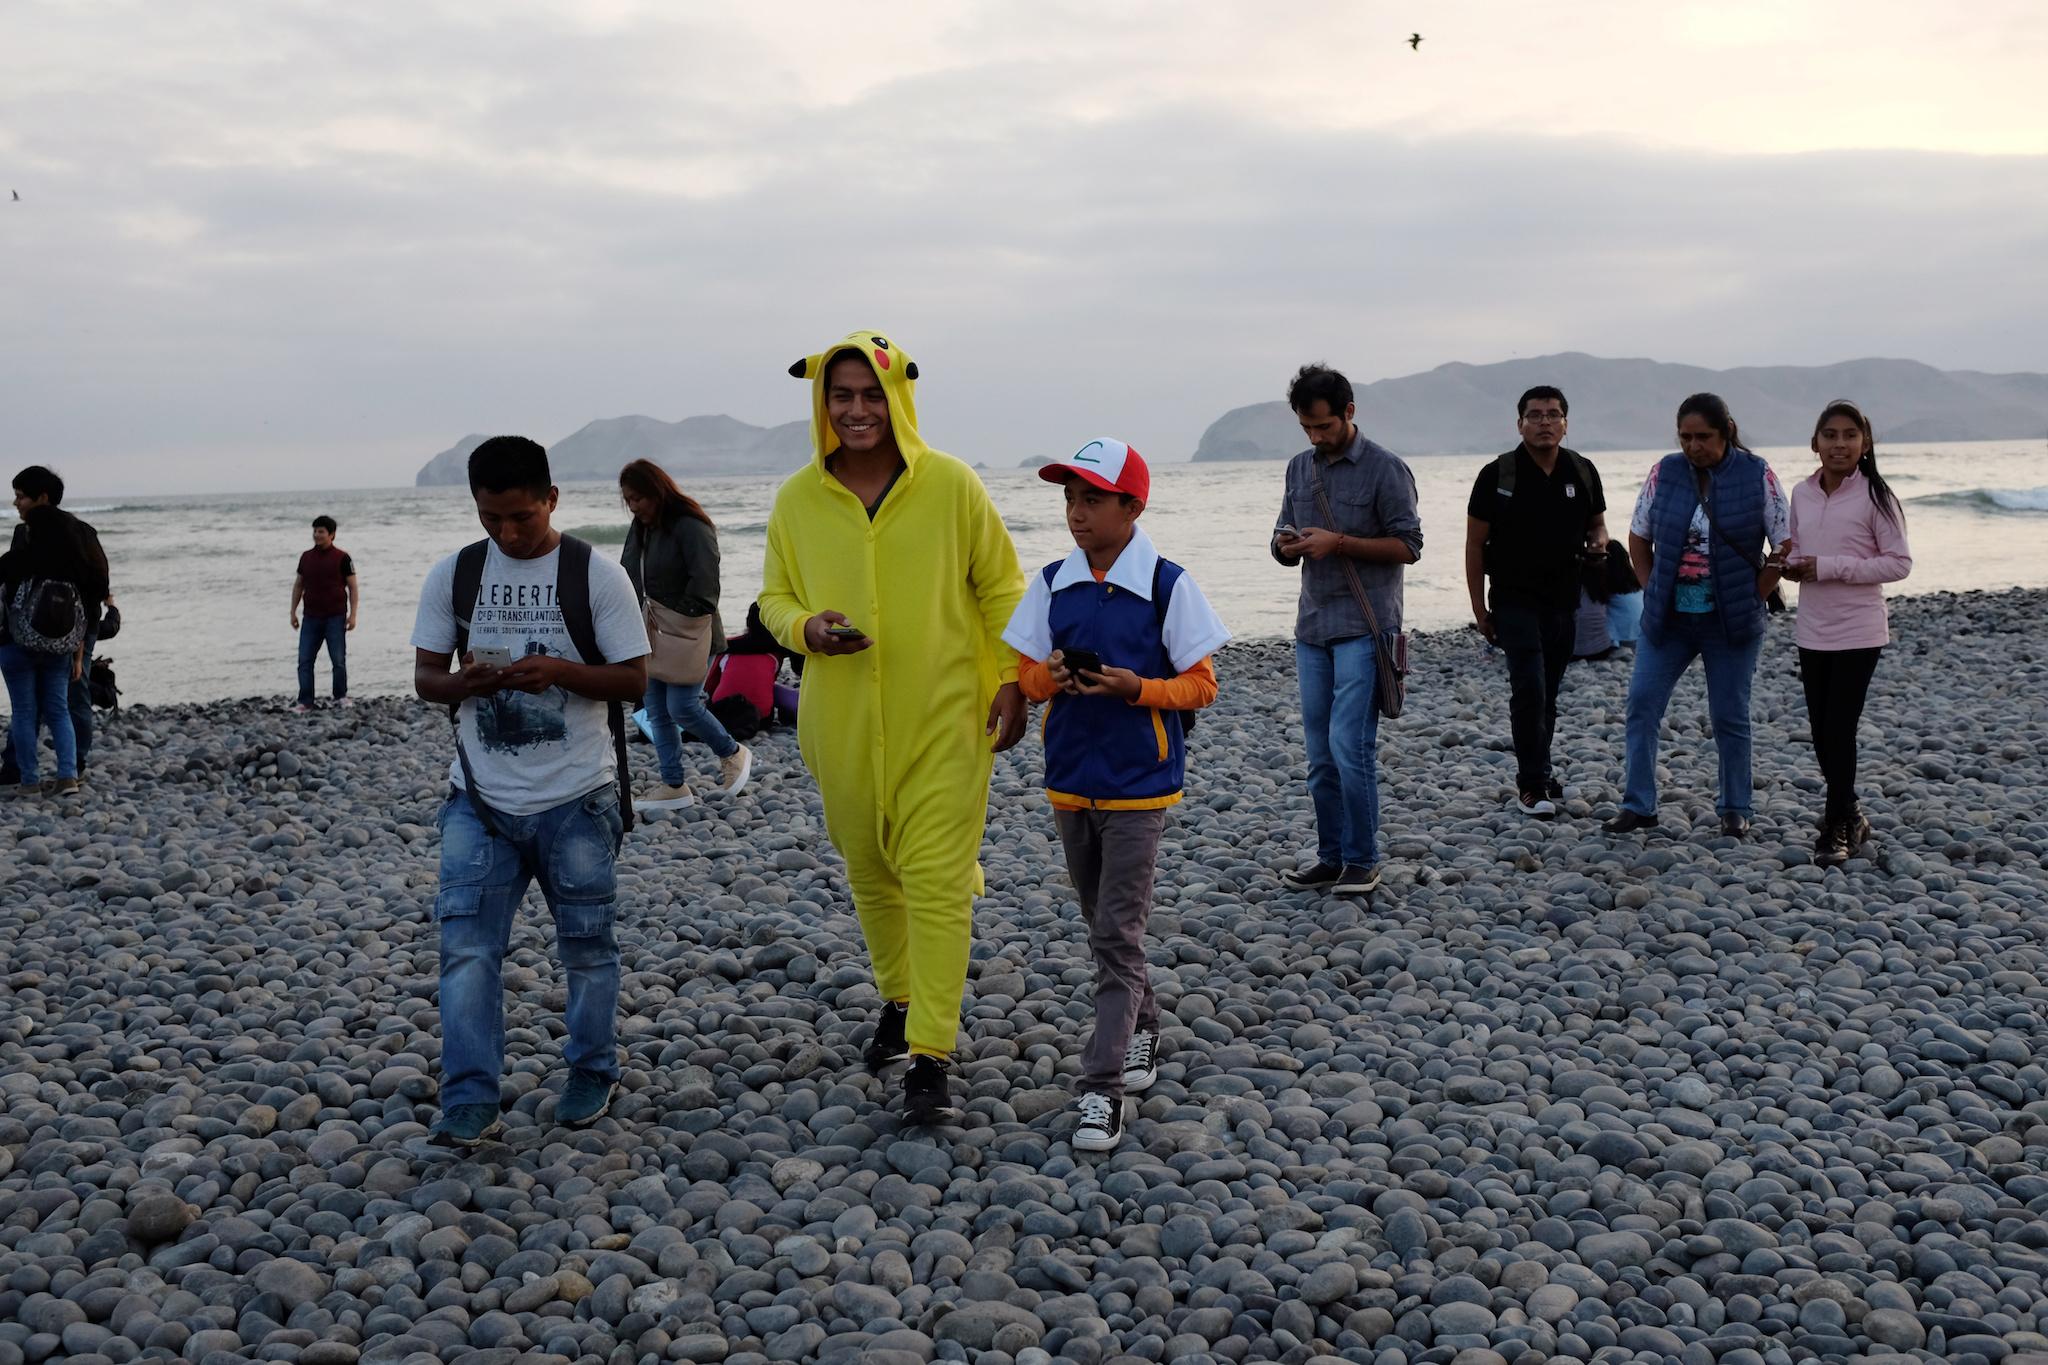 People walk with their mobile phones as some play Pokemon GO at La Punta beach in Callao, Peru